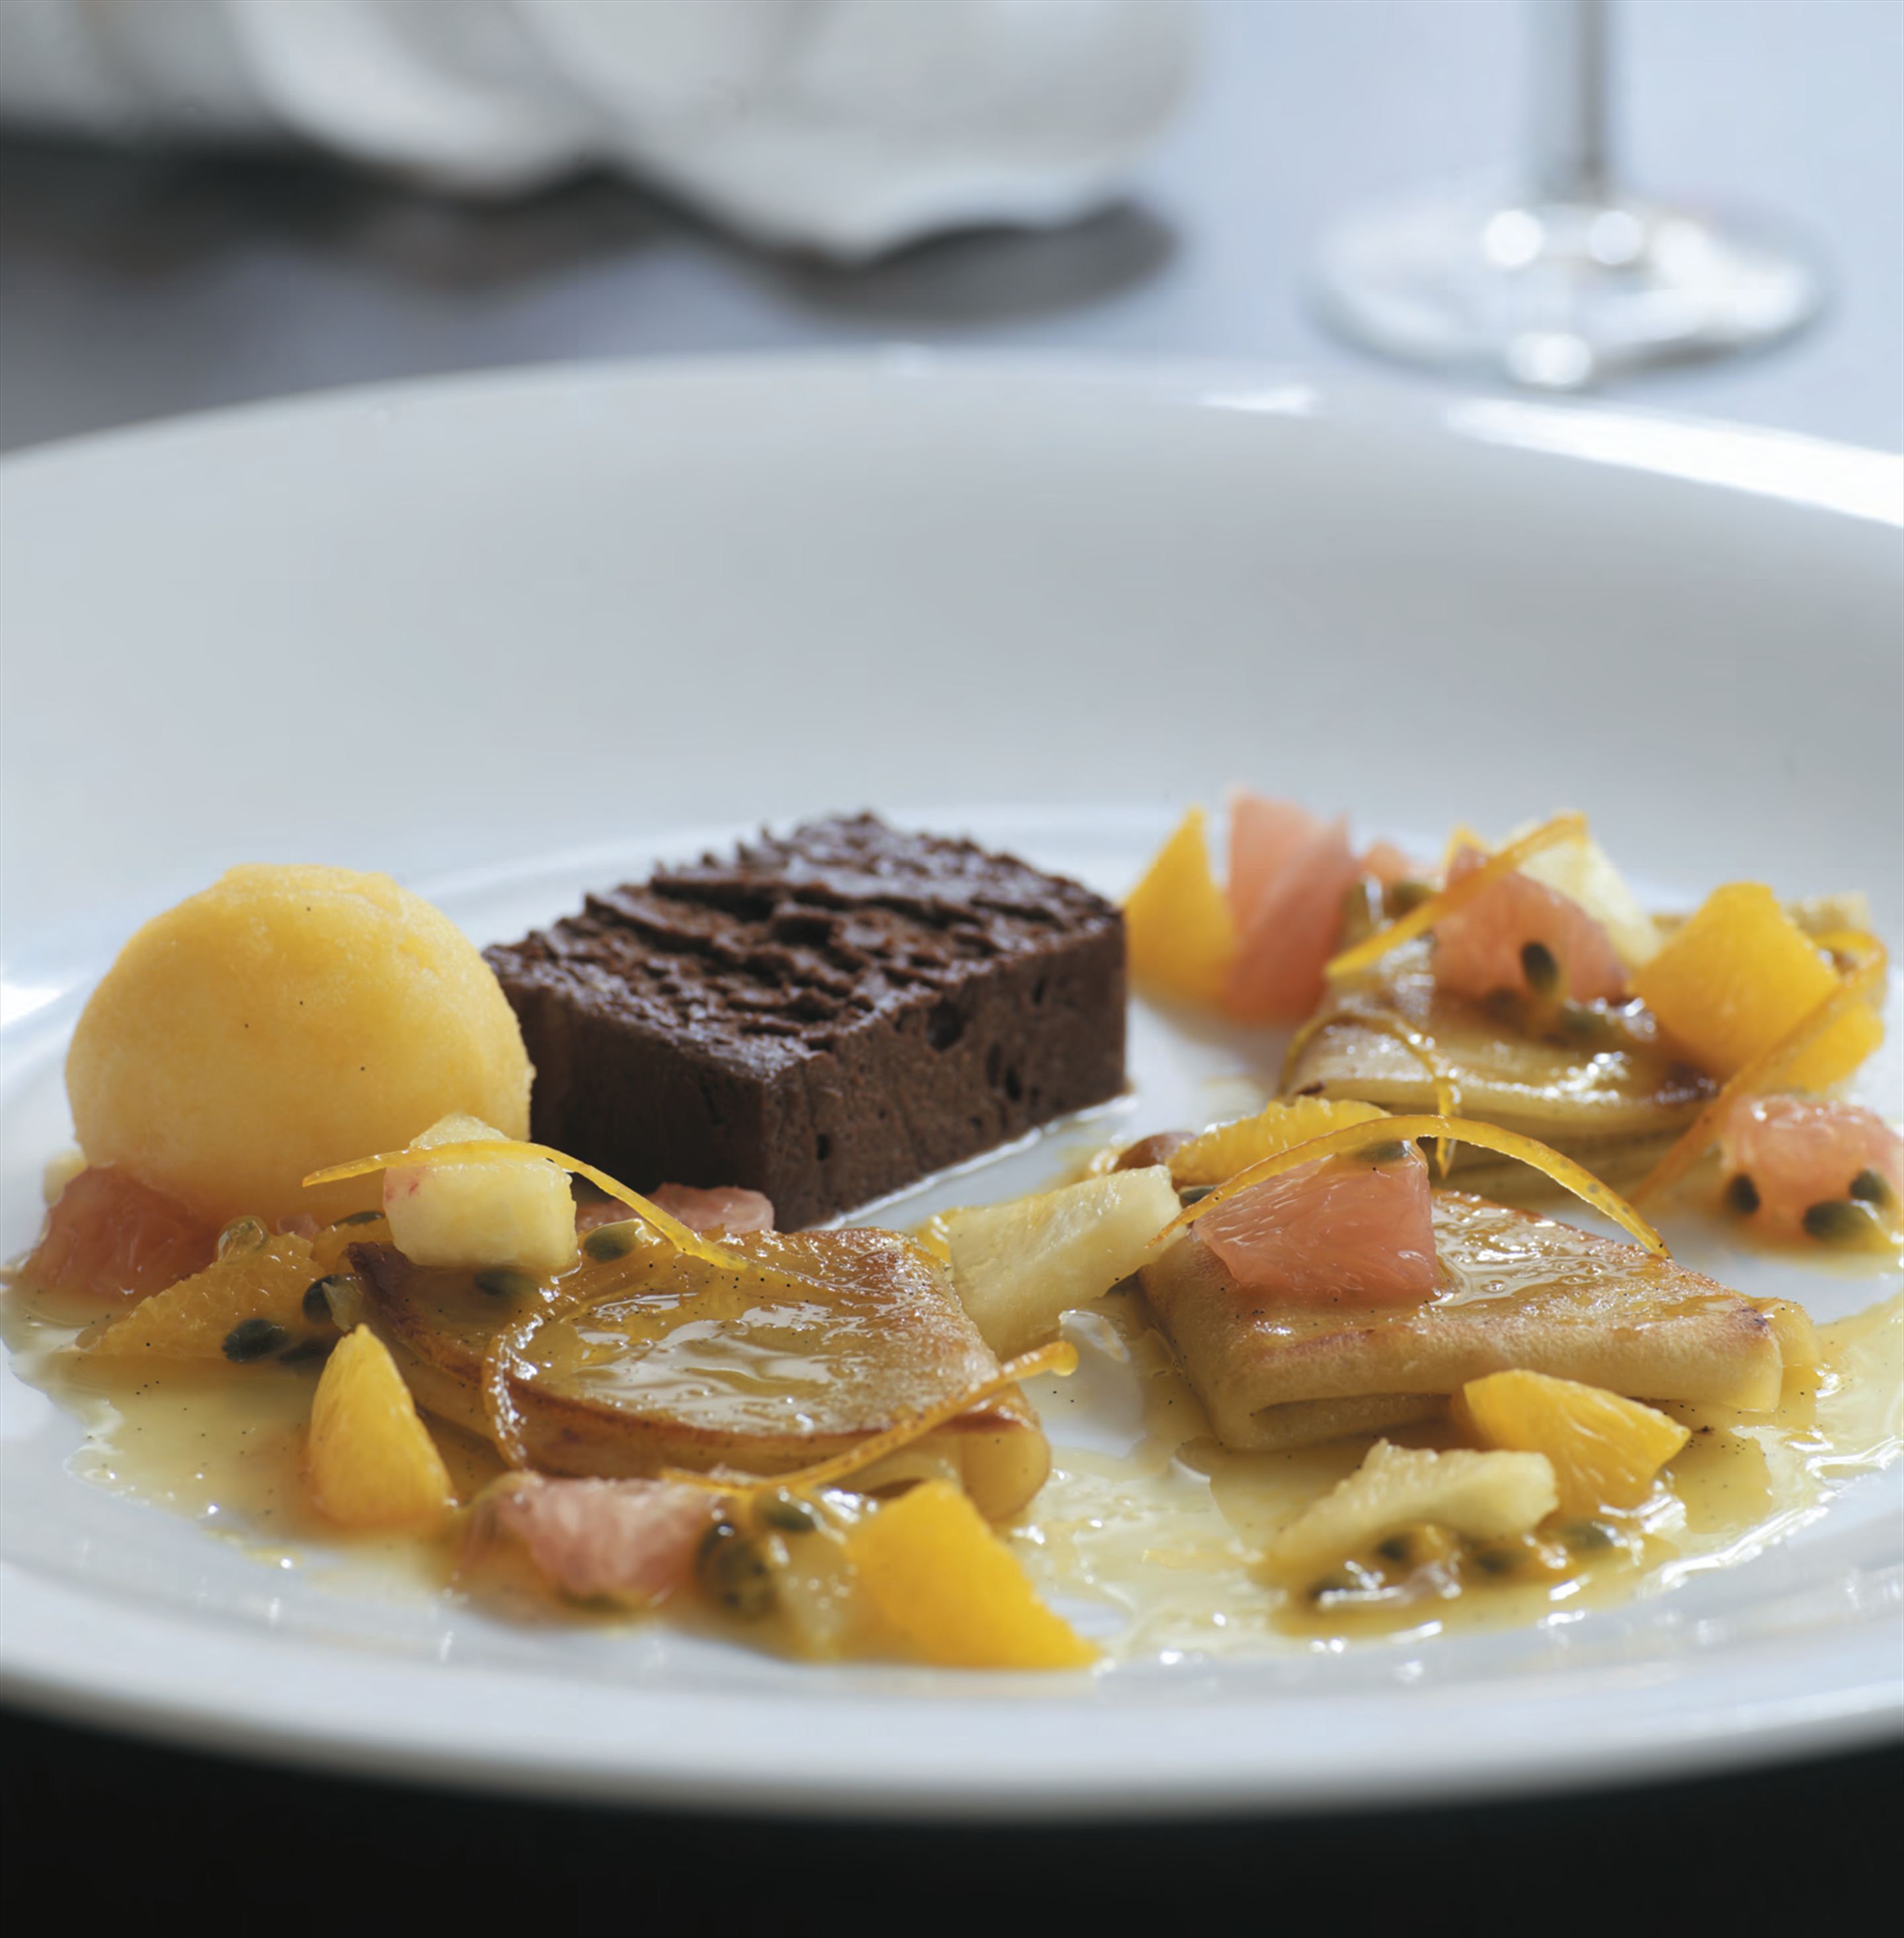 Chocolate terrine with warm passionfruit crêpes suzette and citrus salad